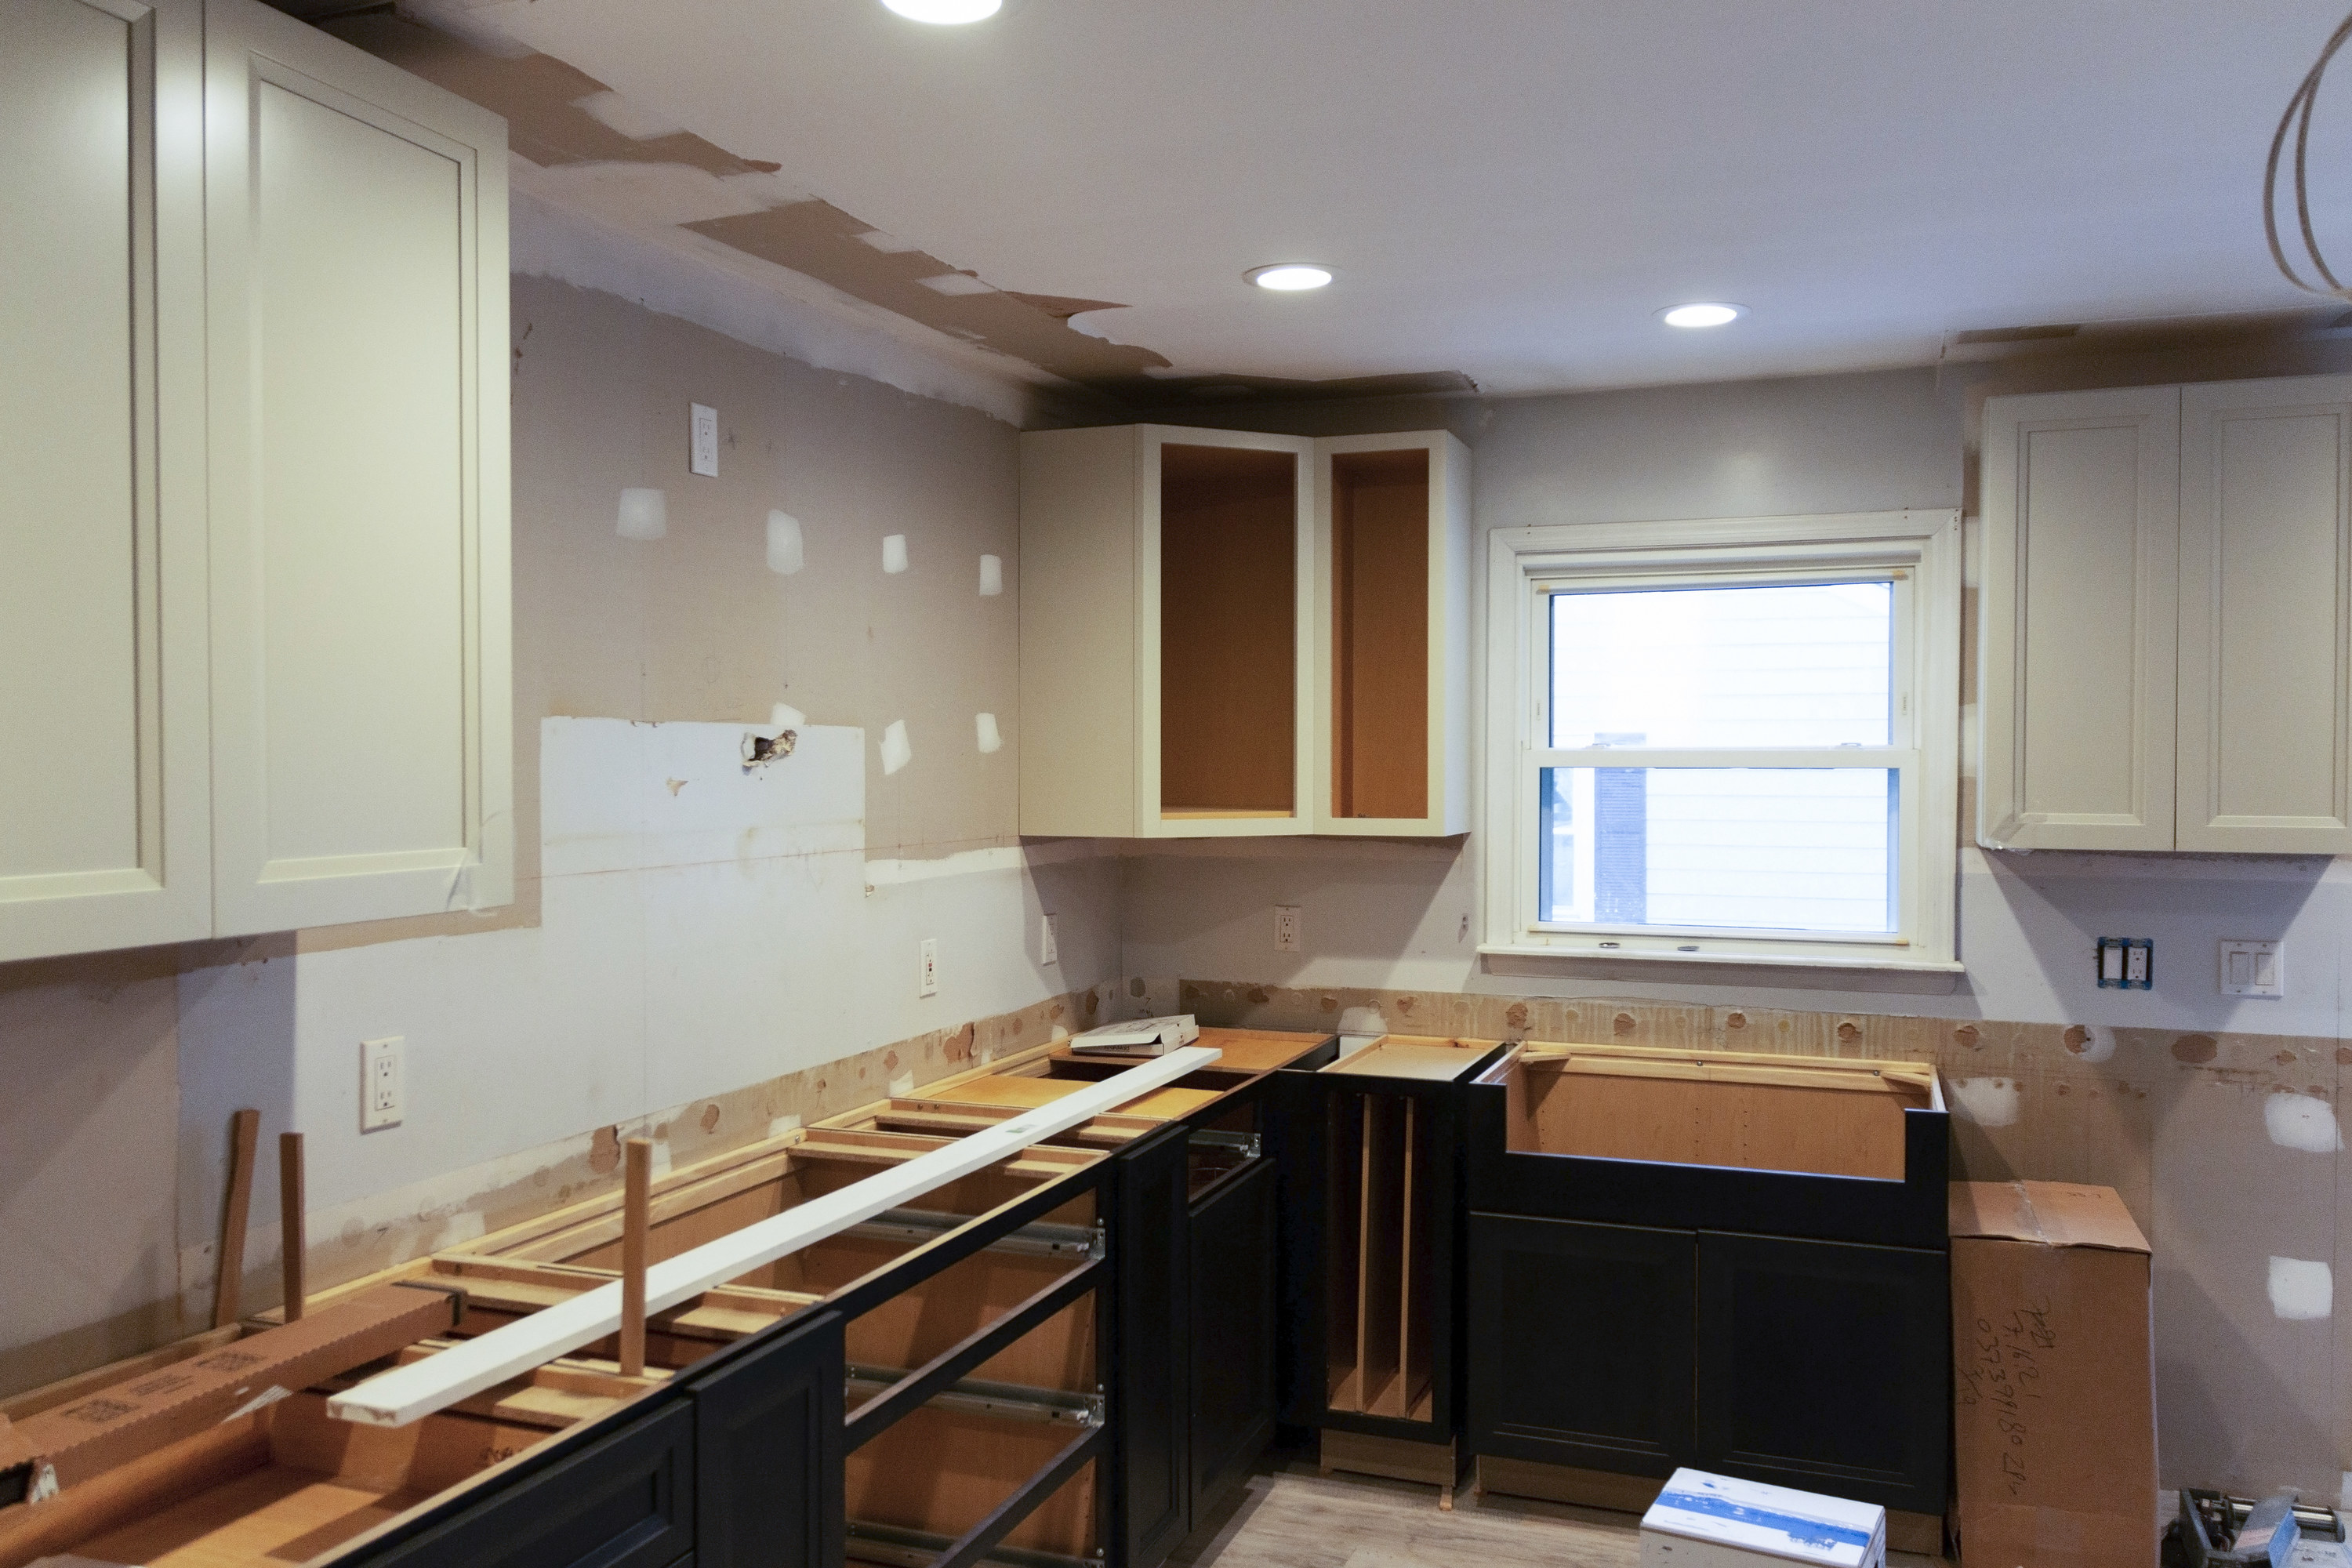 installing kitchen cabinets in a kitchen renovation